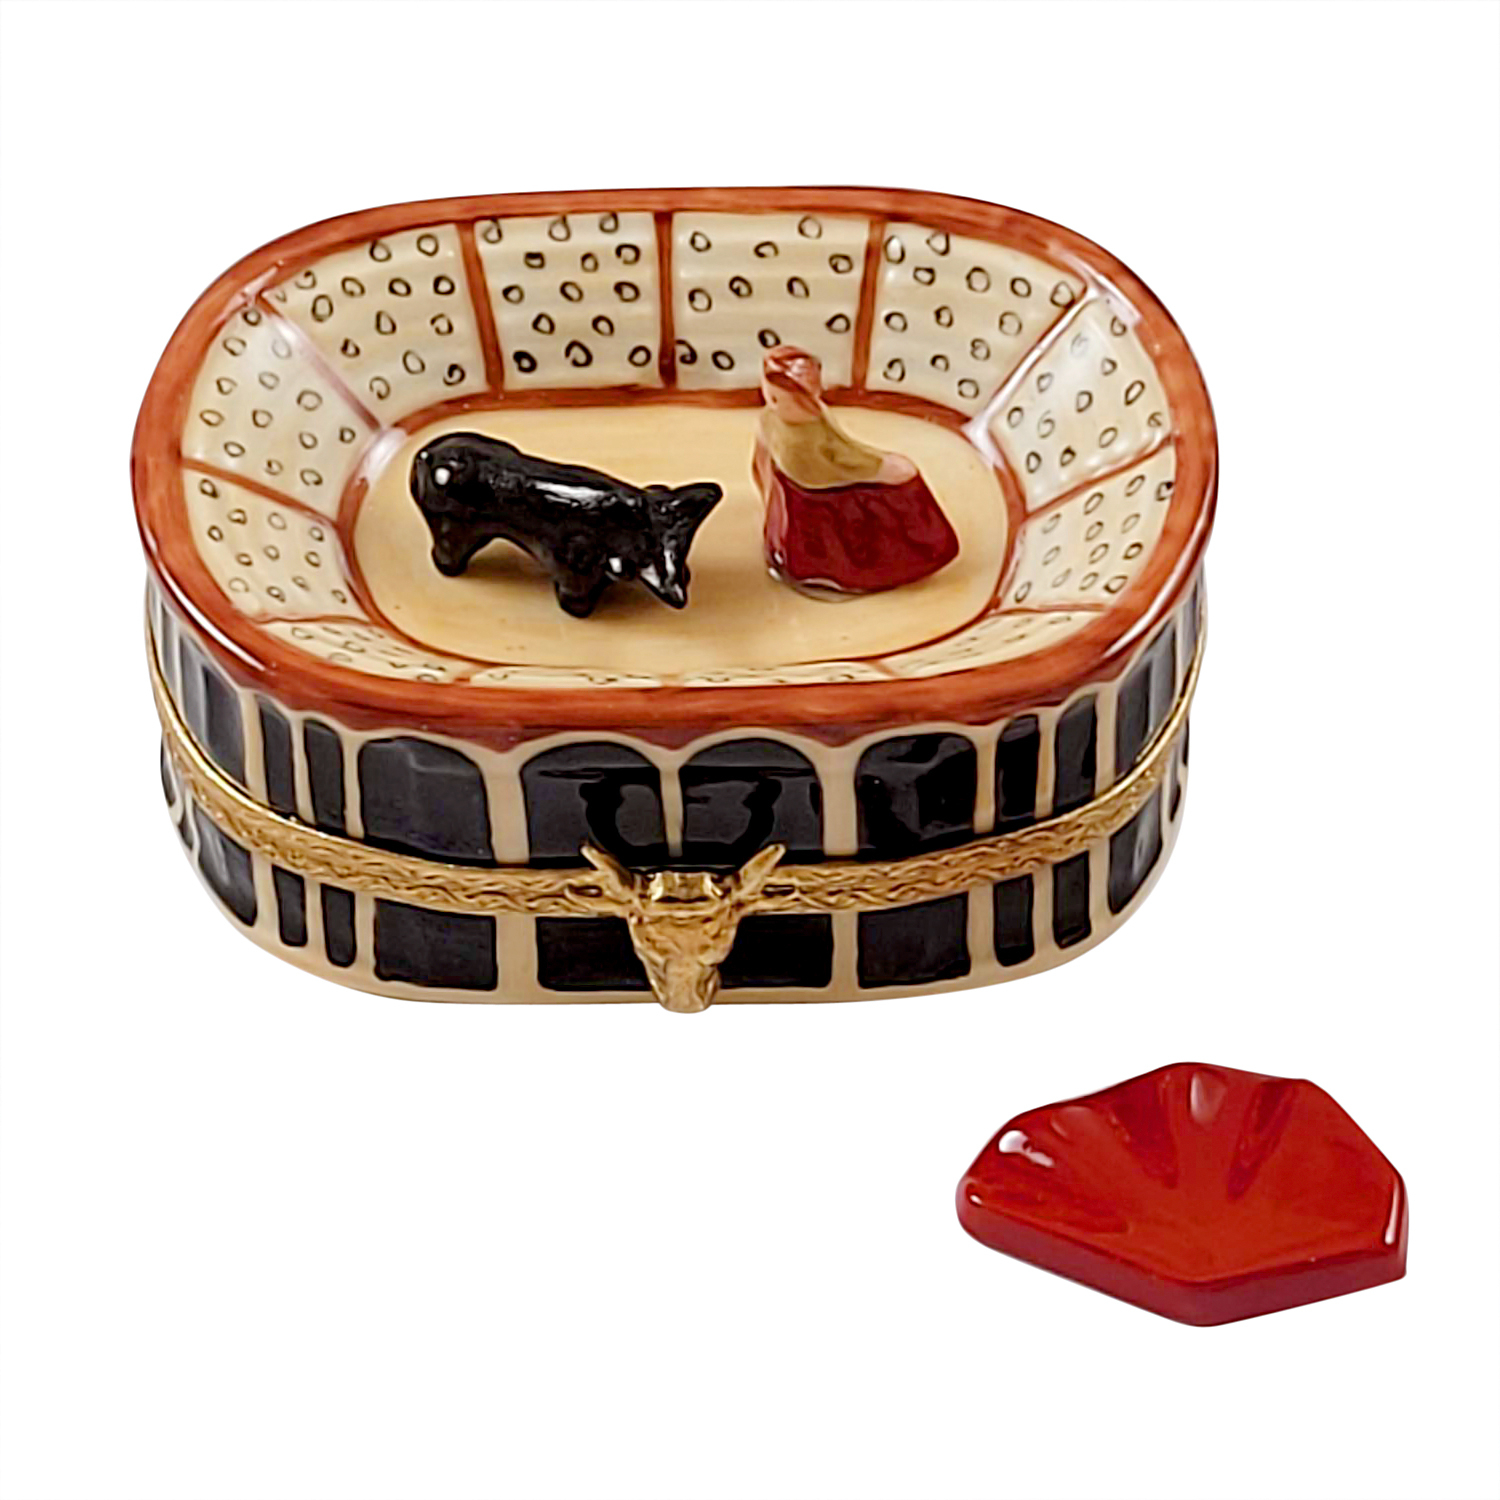 BULLFIGHTING ARENA WITH REMOVABLE RED CAPE